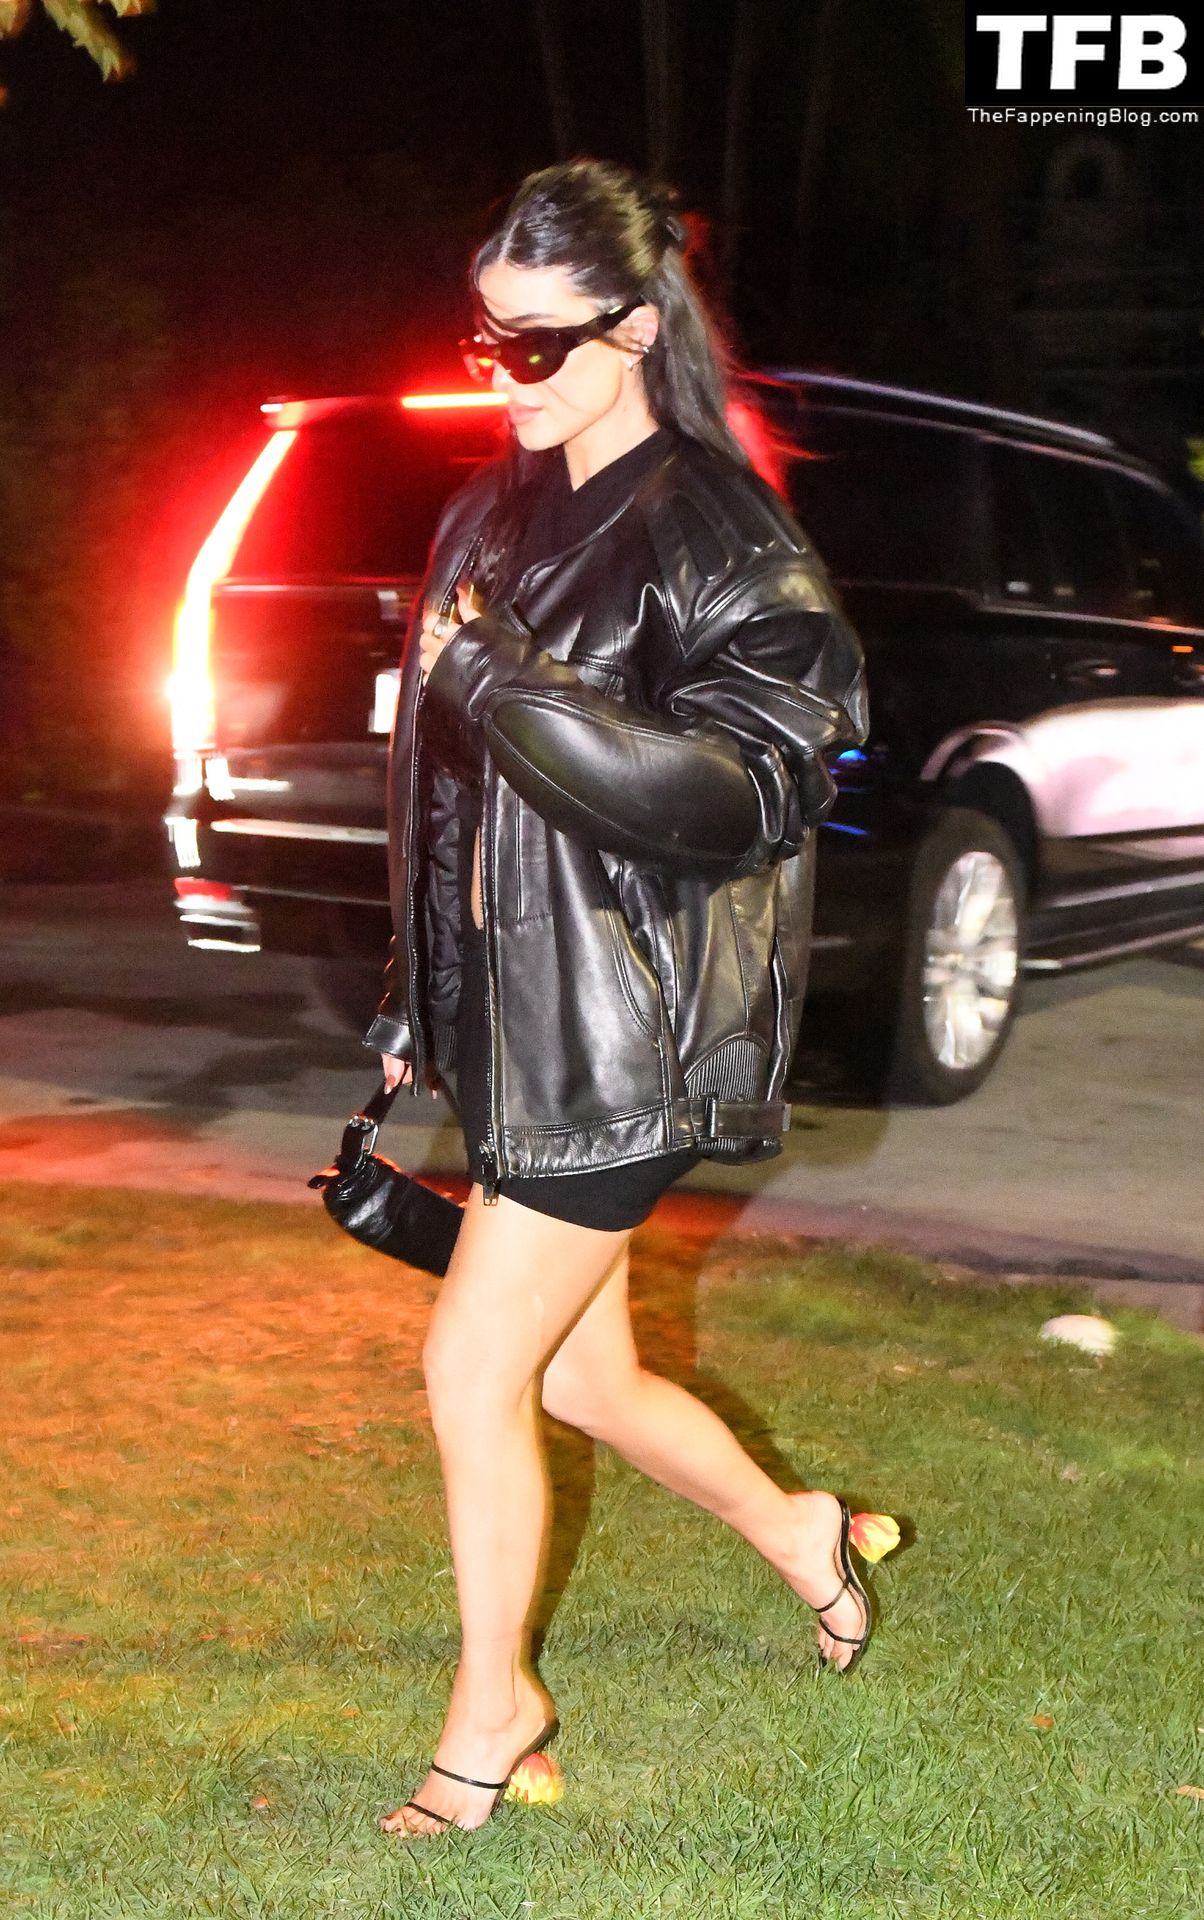 Kylie Jenner is On the Prowl as She Steps Out to Party During Art Basel Weekend (43 Photos)